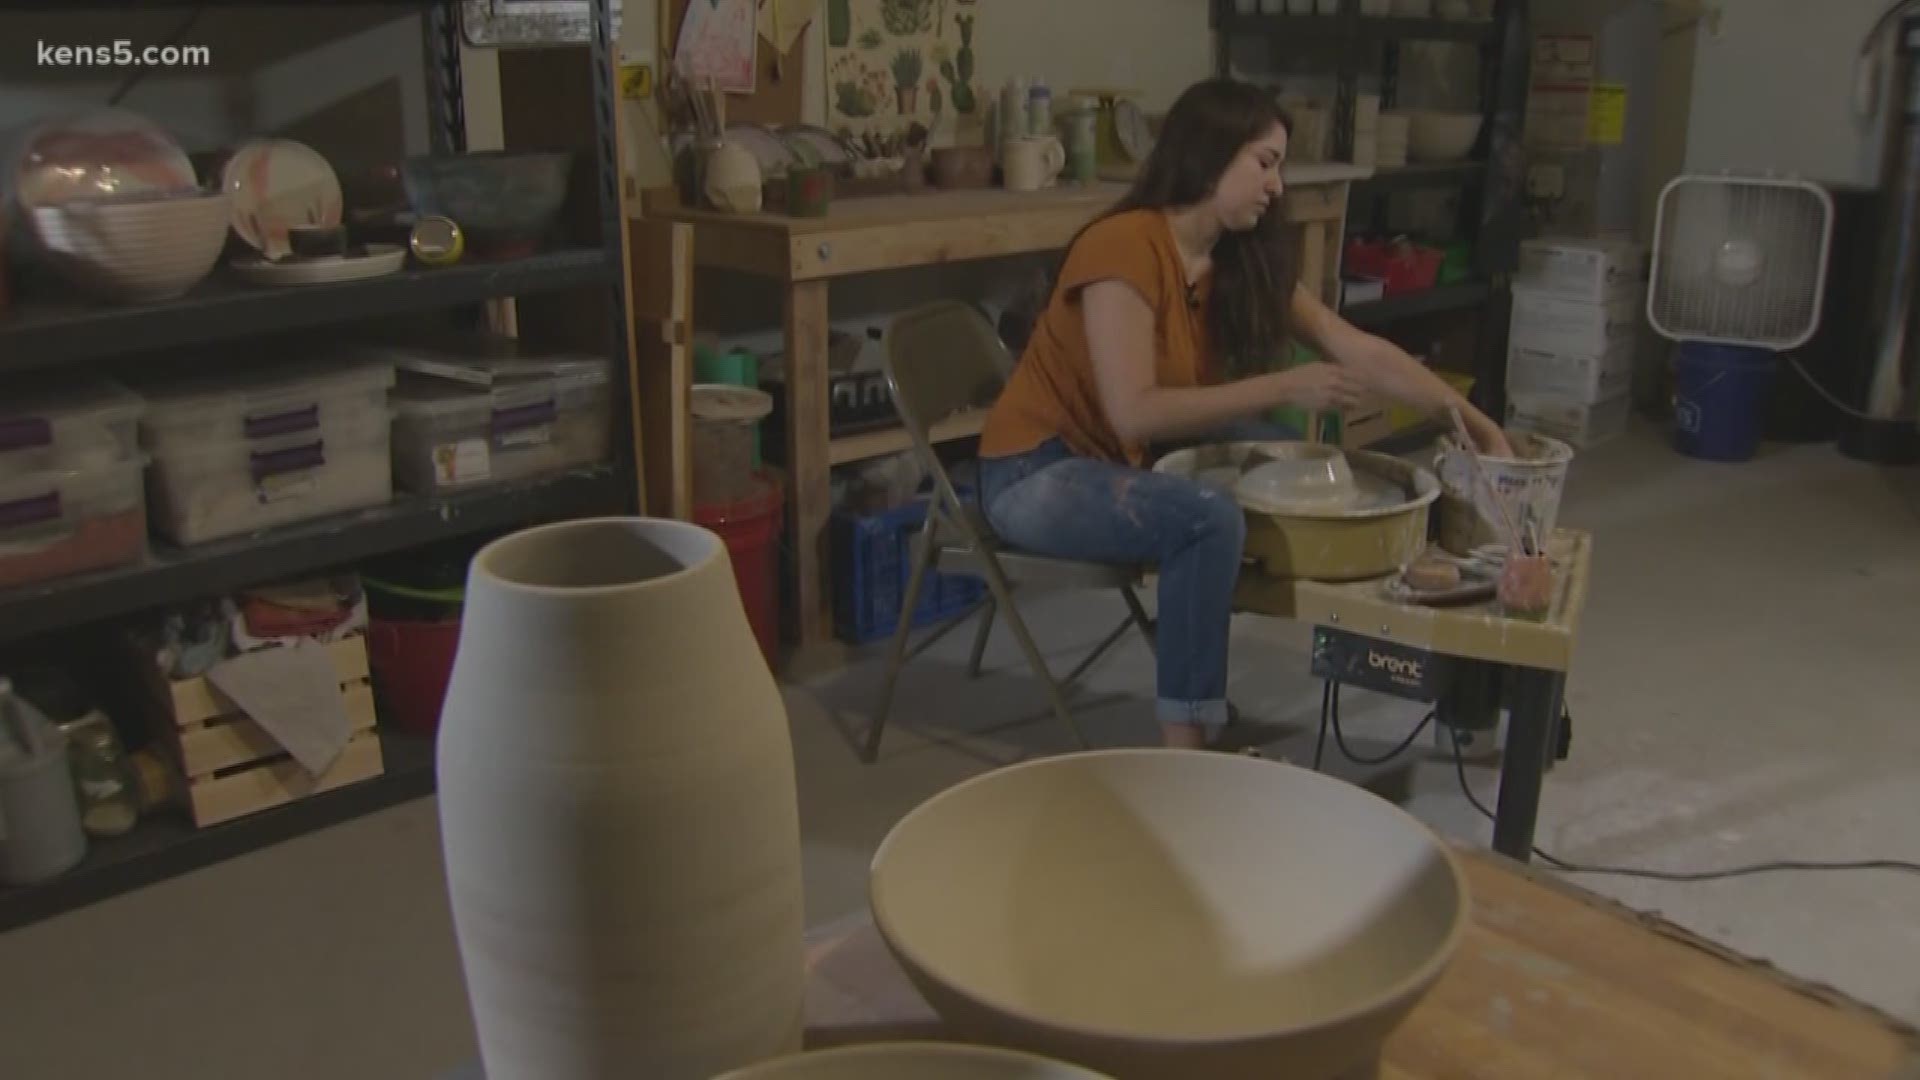 A teacher's love for clay art has become a booming business through her online store, ECB designs.